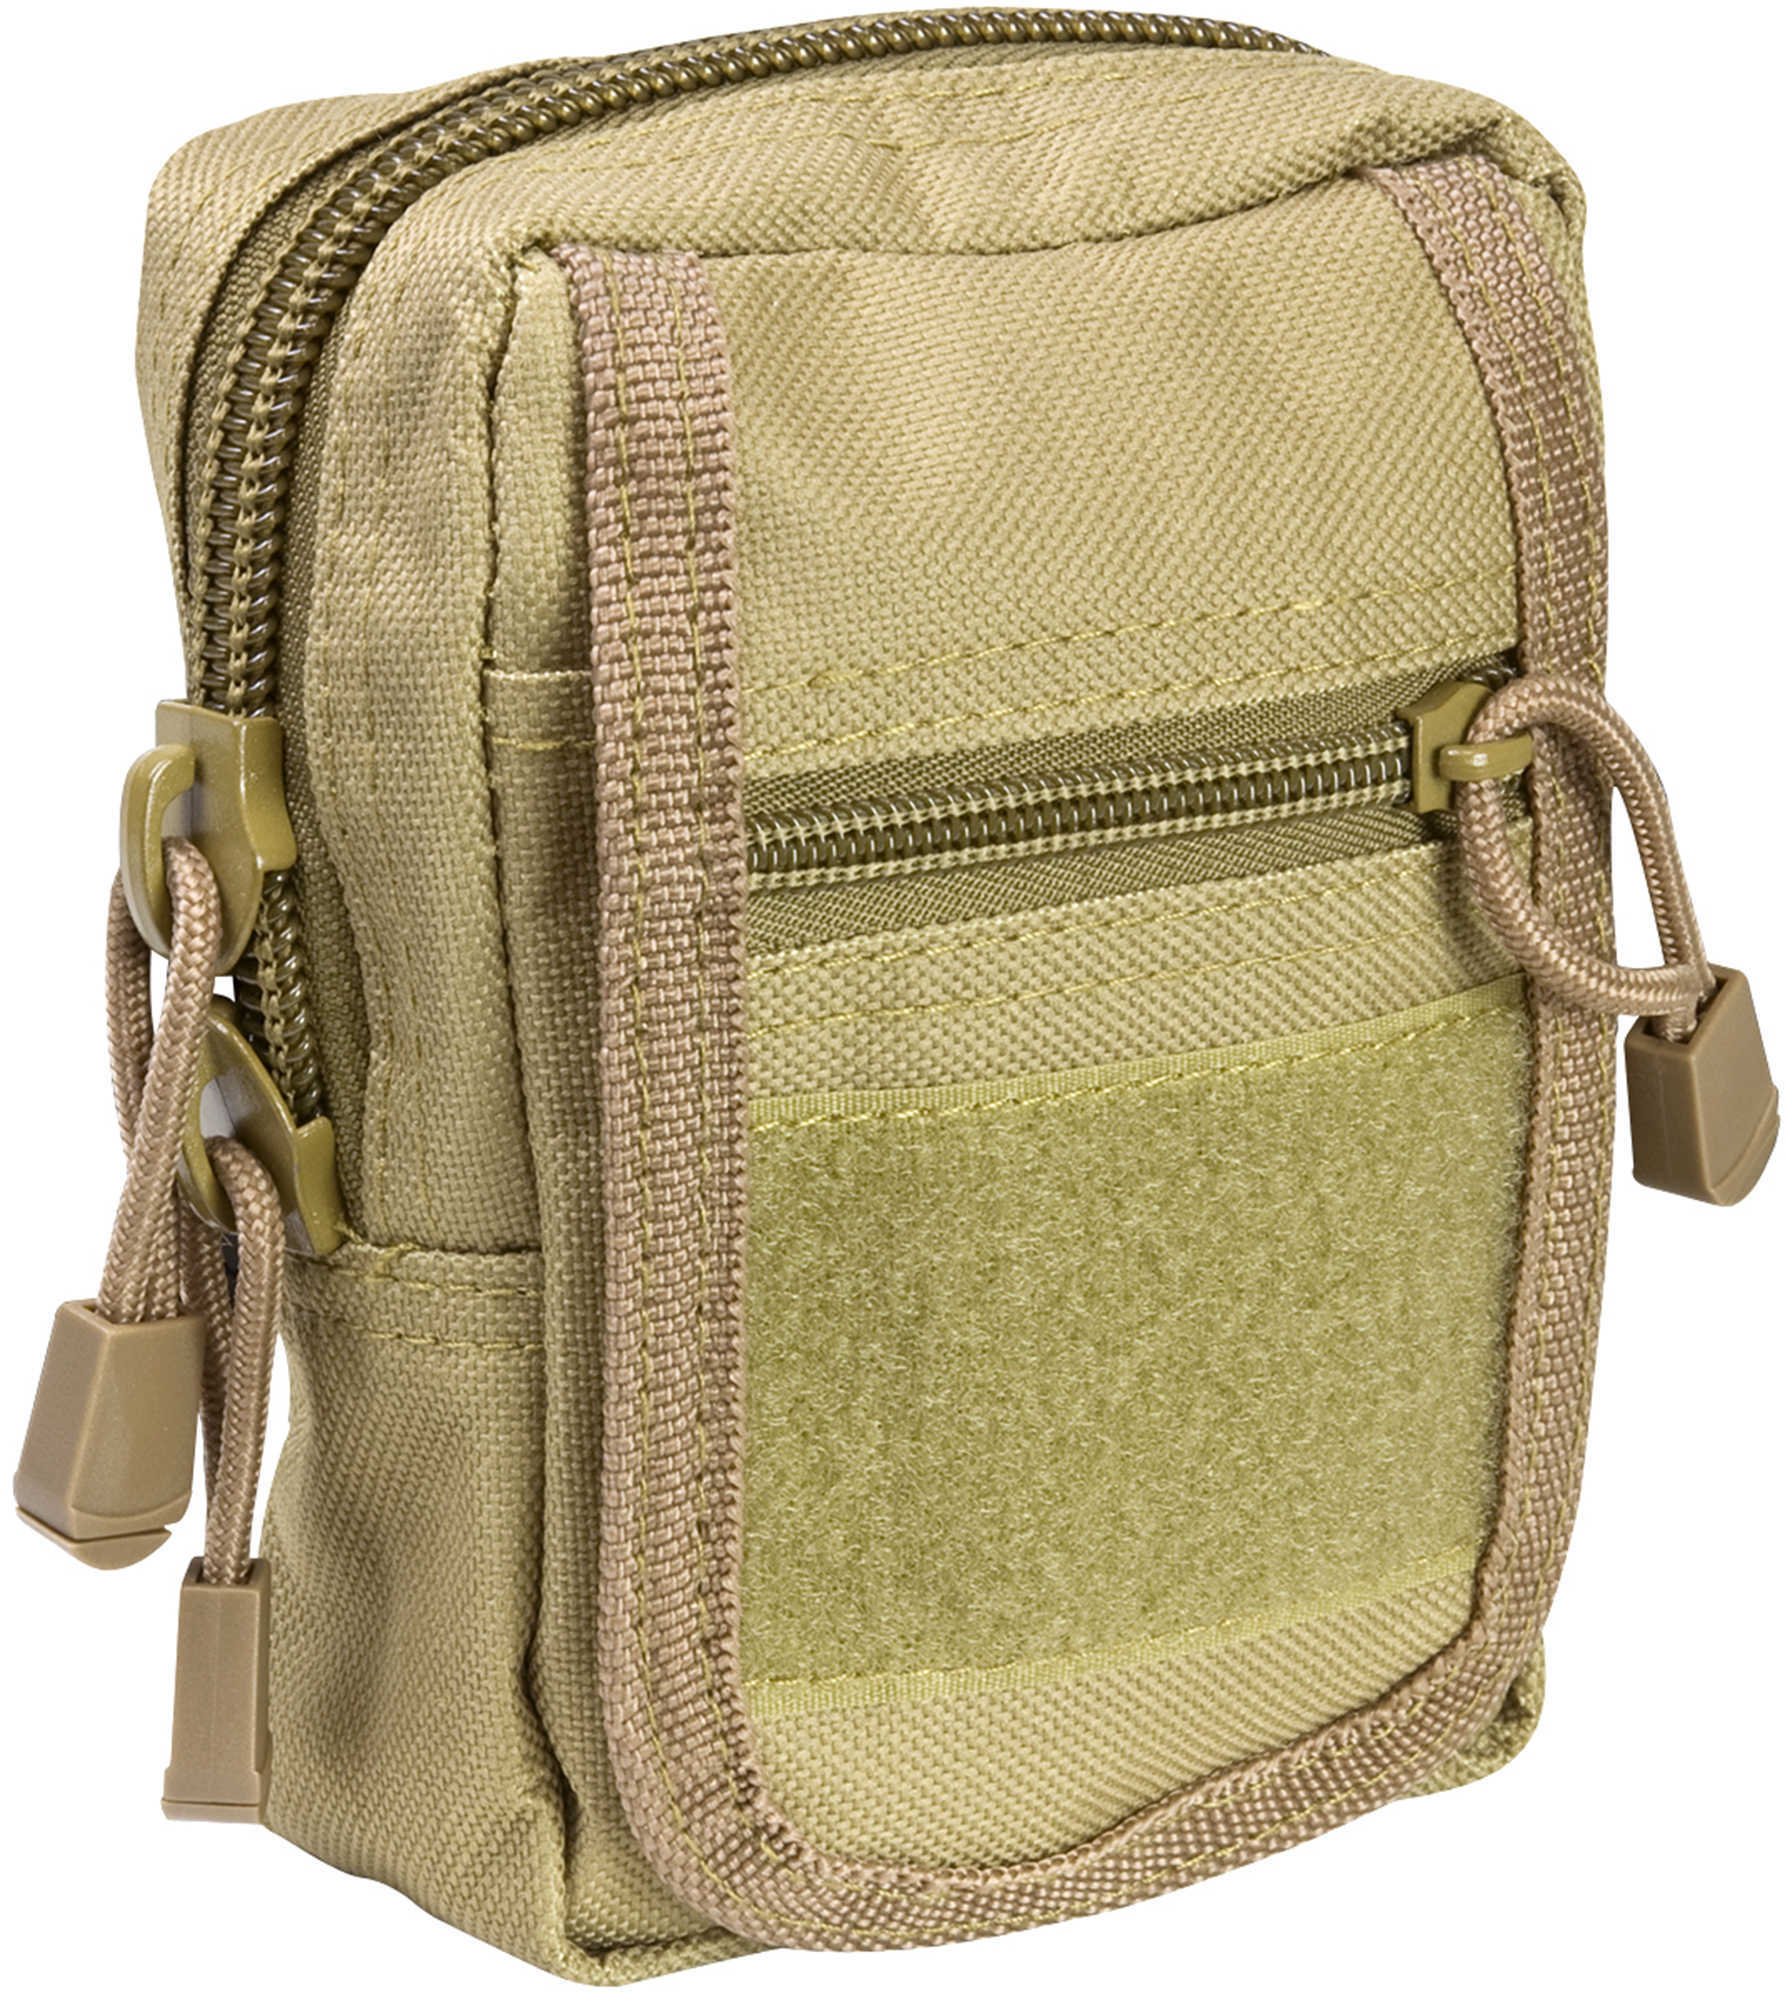 NCSTAR Small Utility Pouch Nylon Tan MOLLE Straps for Attachment Zippered Compartment CVSUP2934T